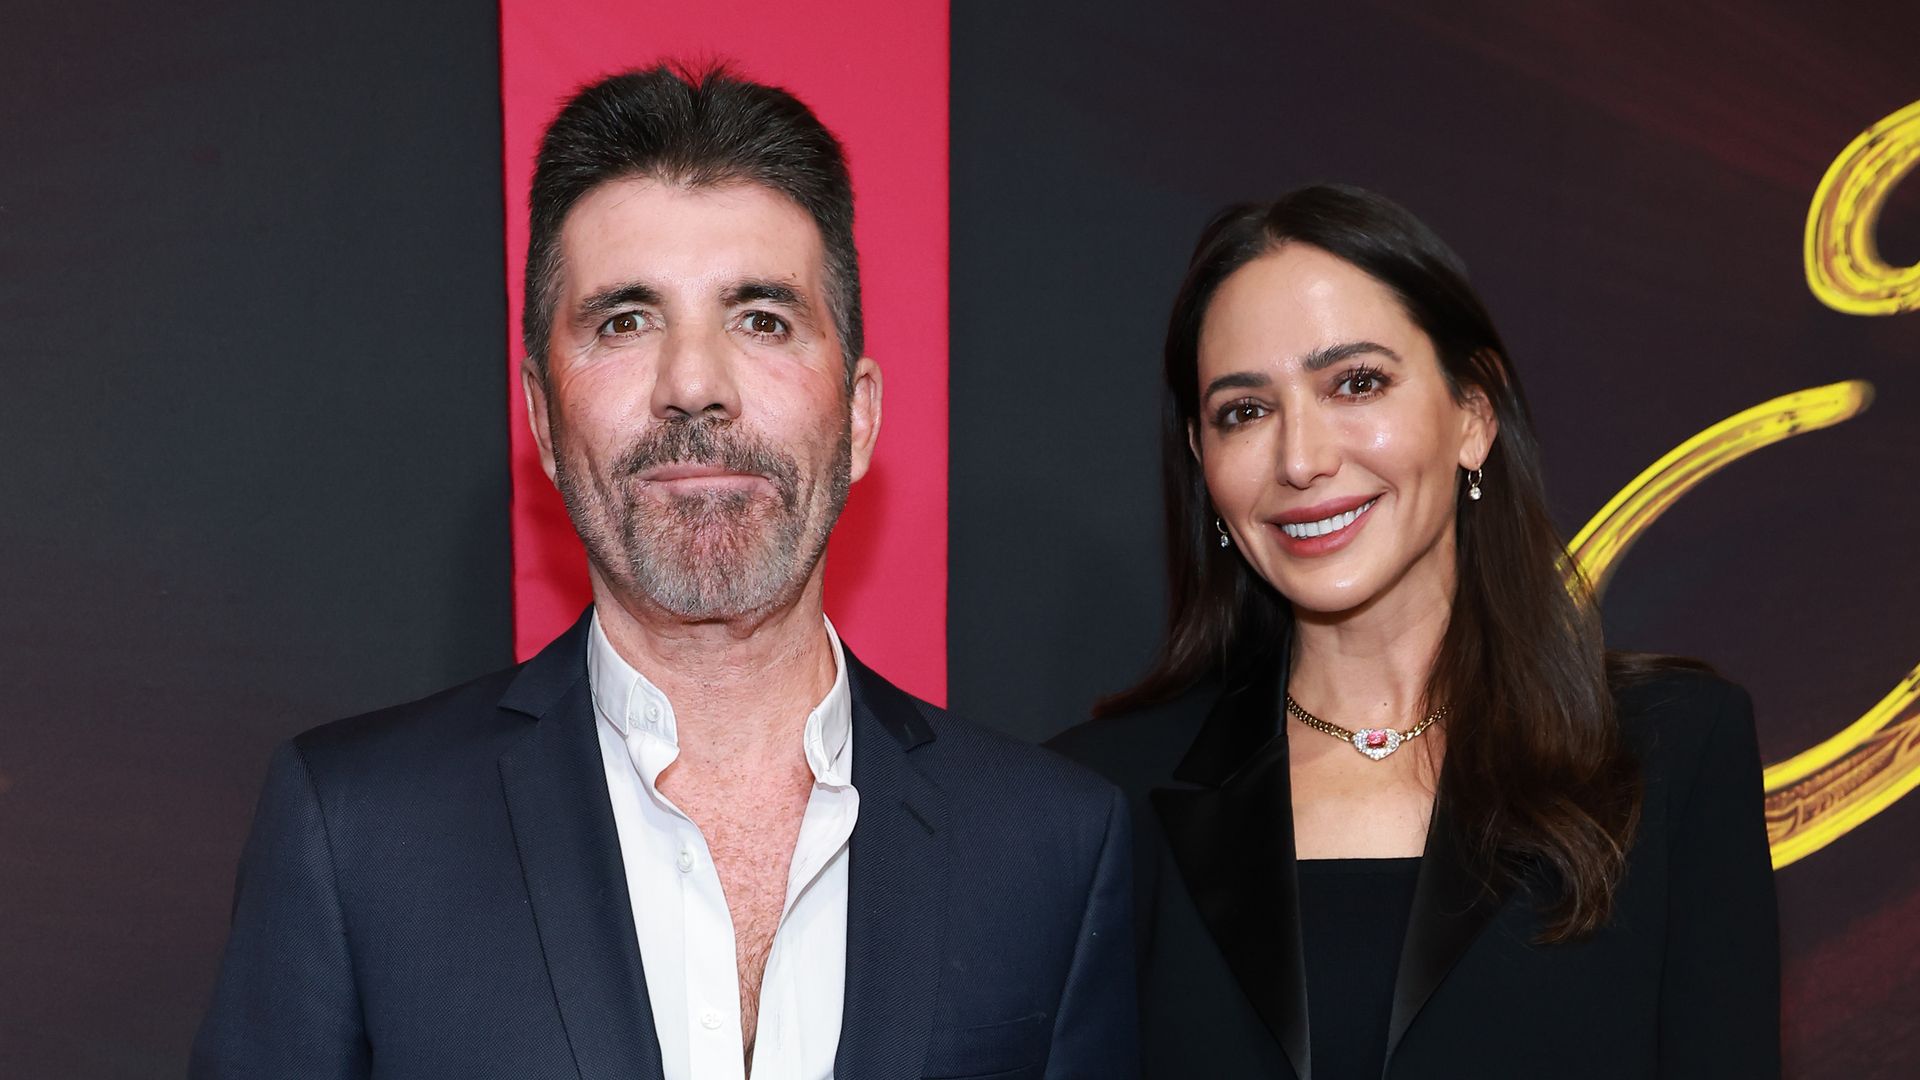 Simon Cowell and Lauren Silverman attend the Broadway opening night of & Juliet at 